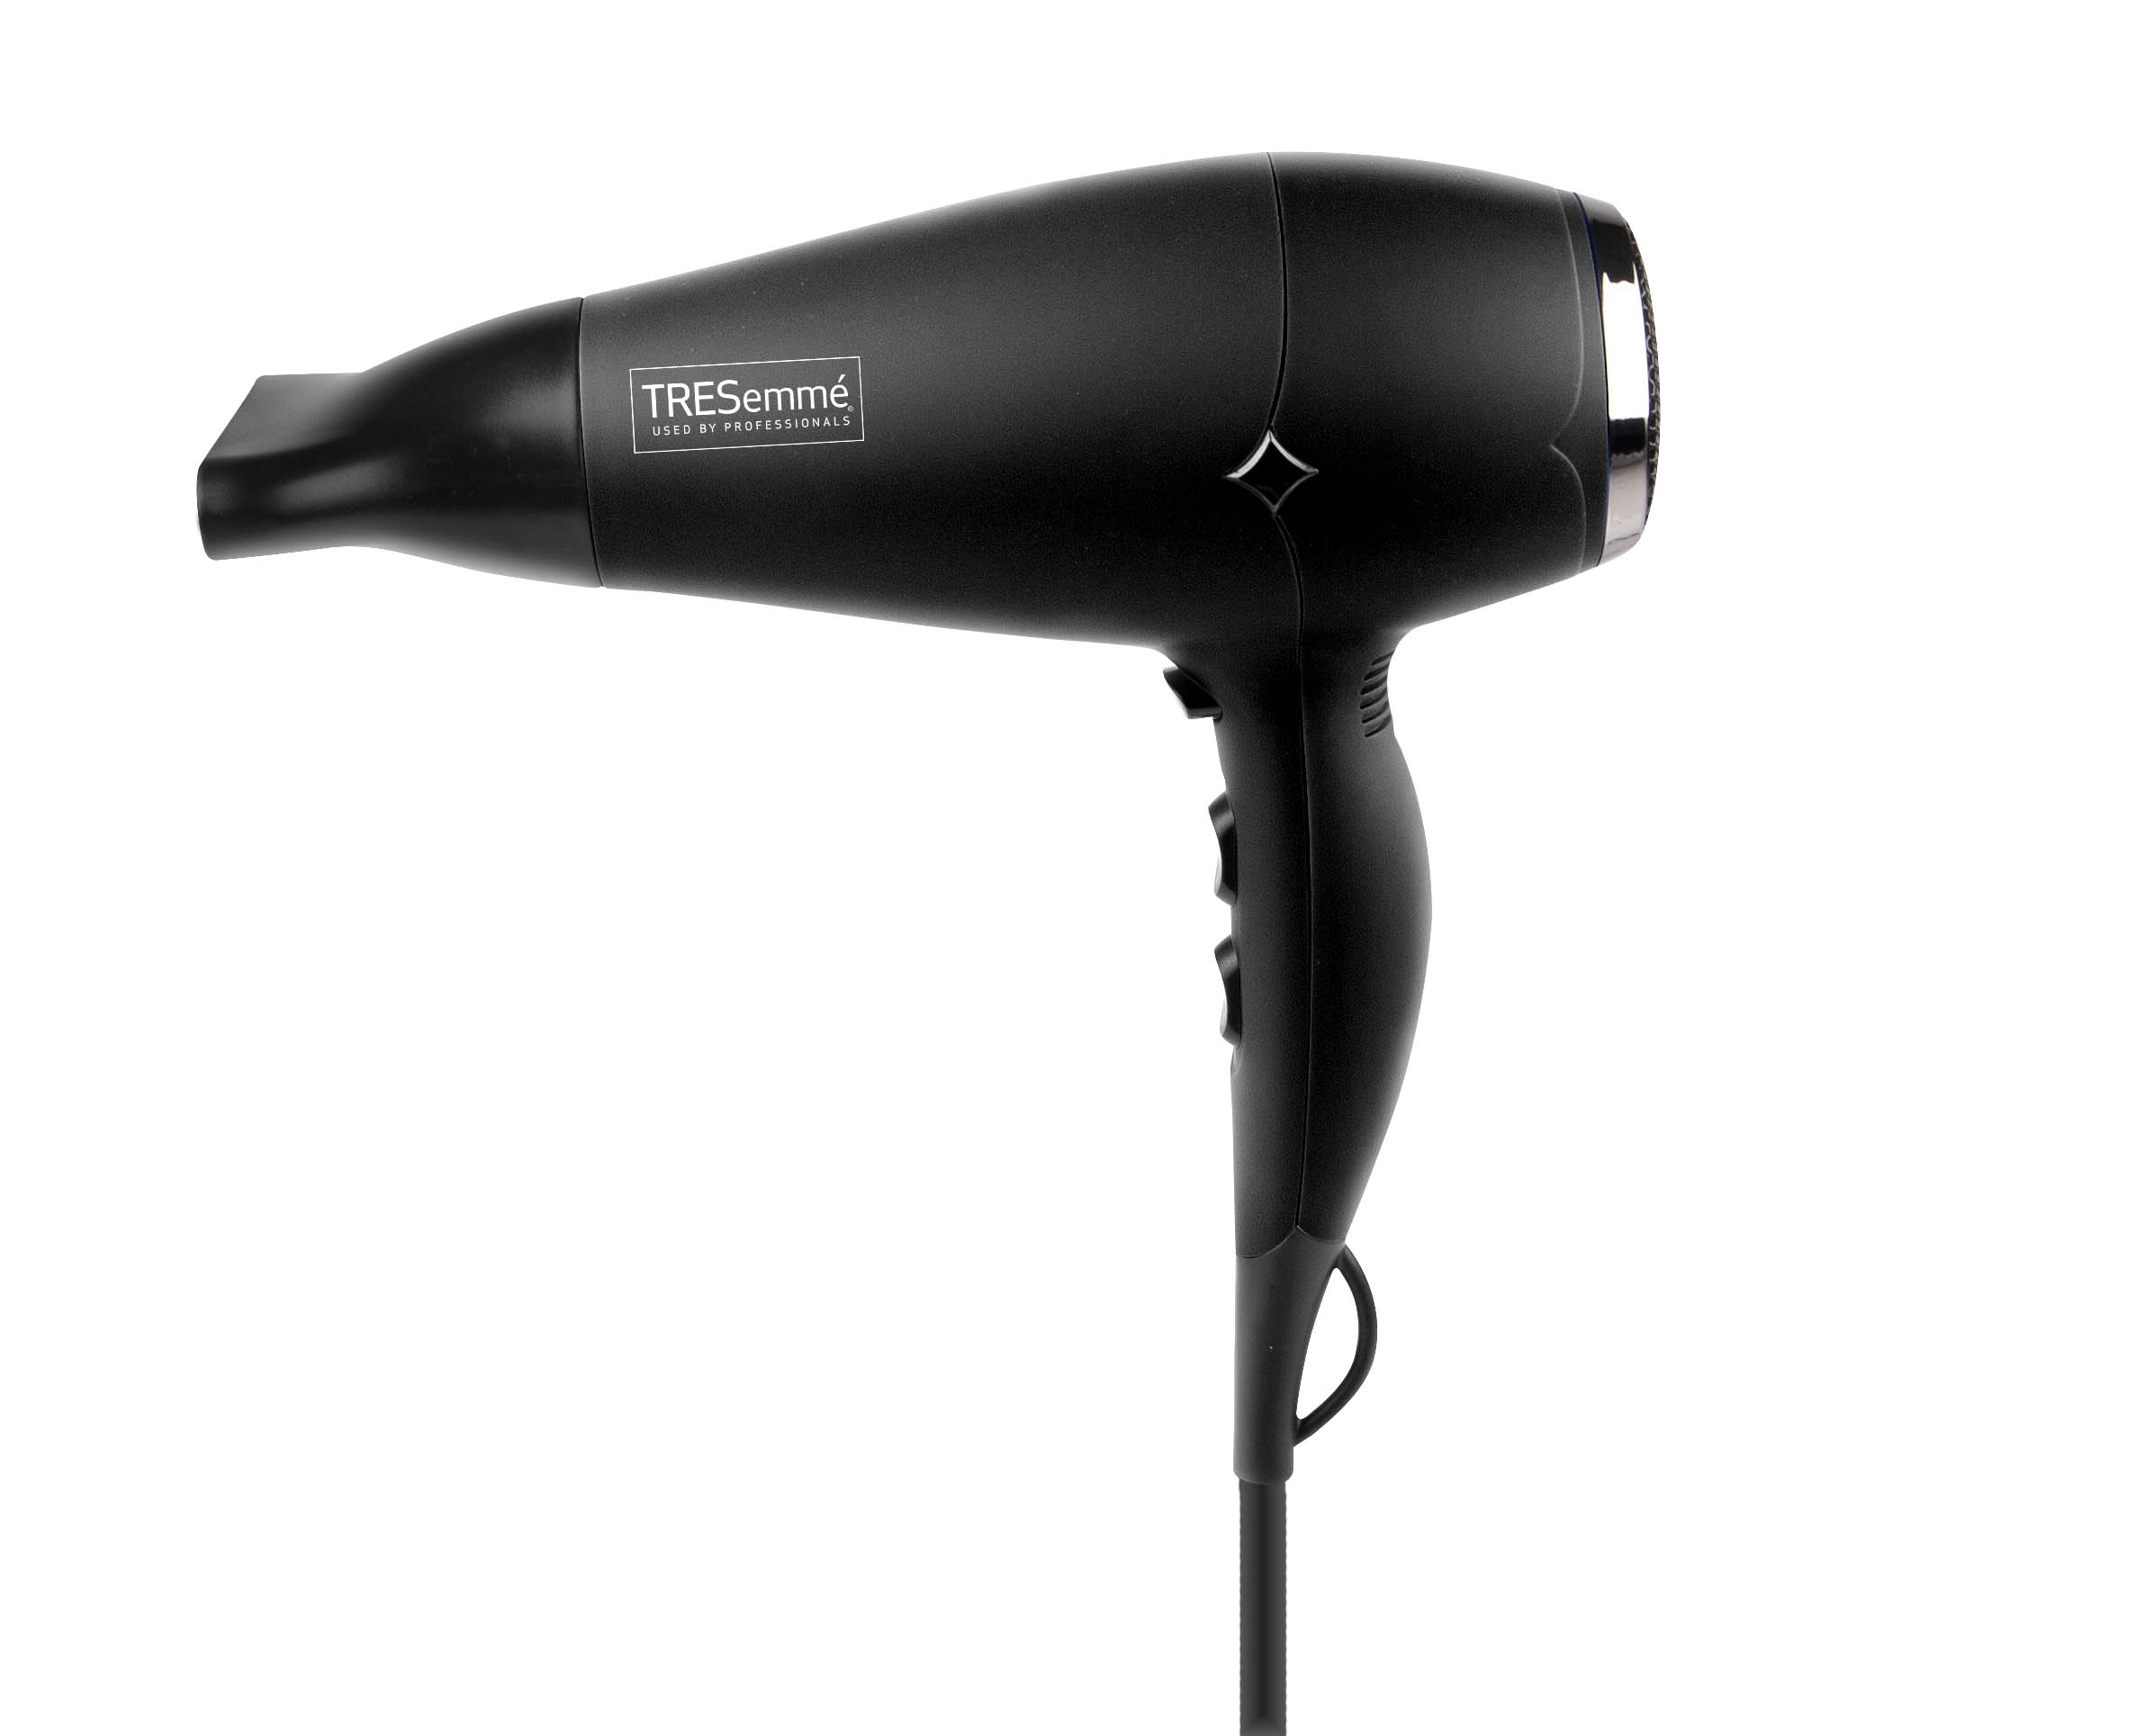 TRESemmé Thermal Creations Rubber Finish Travel Size Professional Tourmaline Ceramic Hair Dryer, 1875 Watts, Black - image 1 of 10